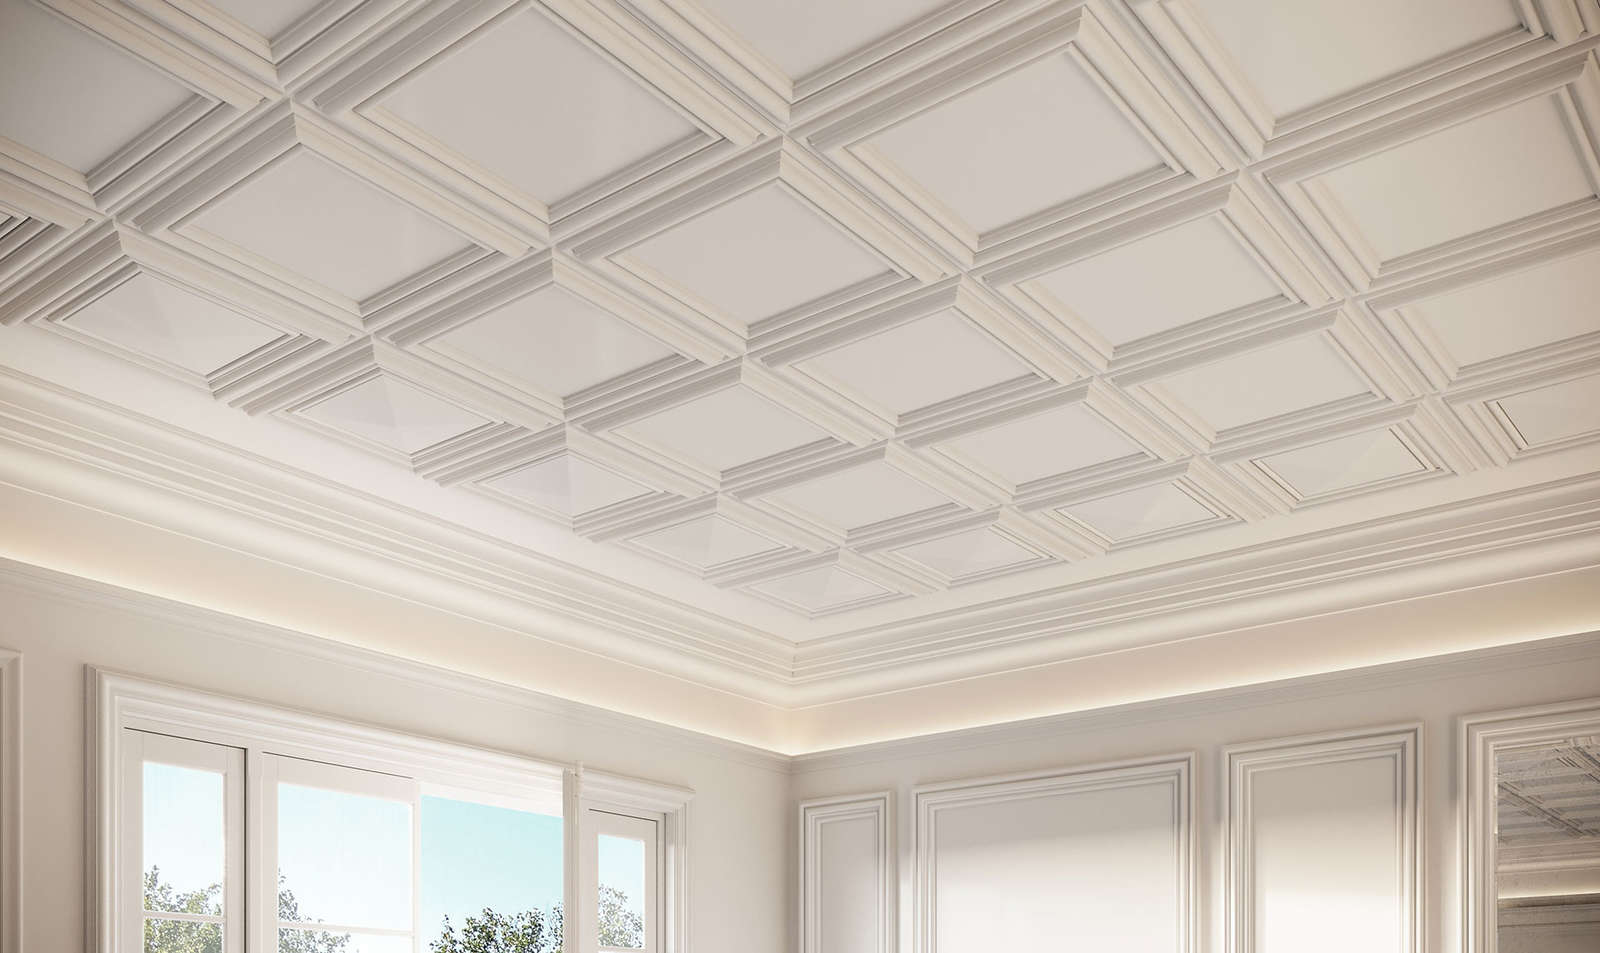             Classic moulding for indirect lighting Florence - C323
        